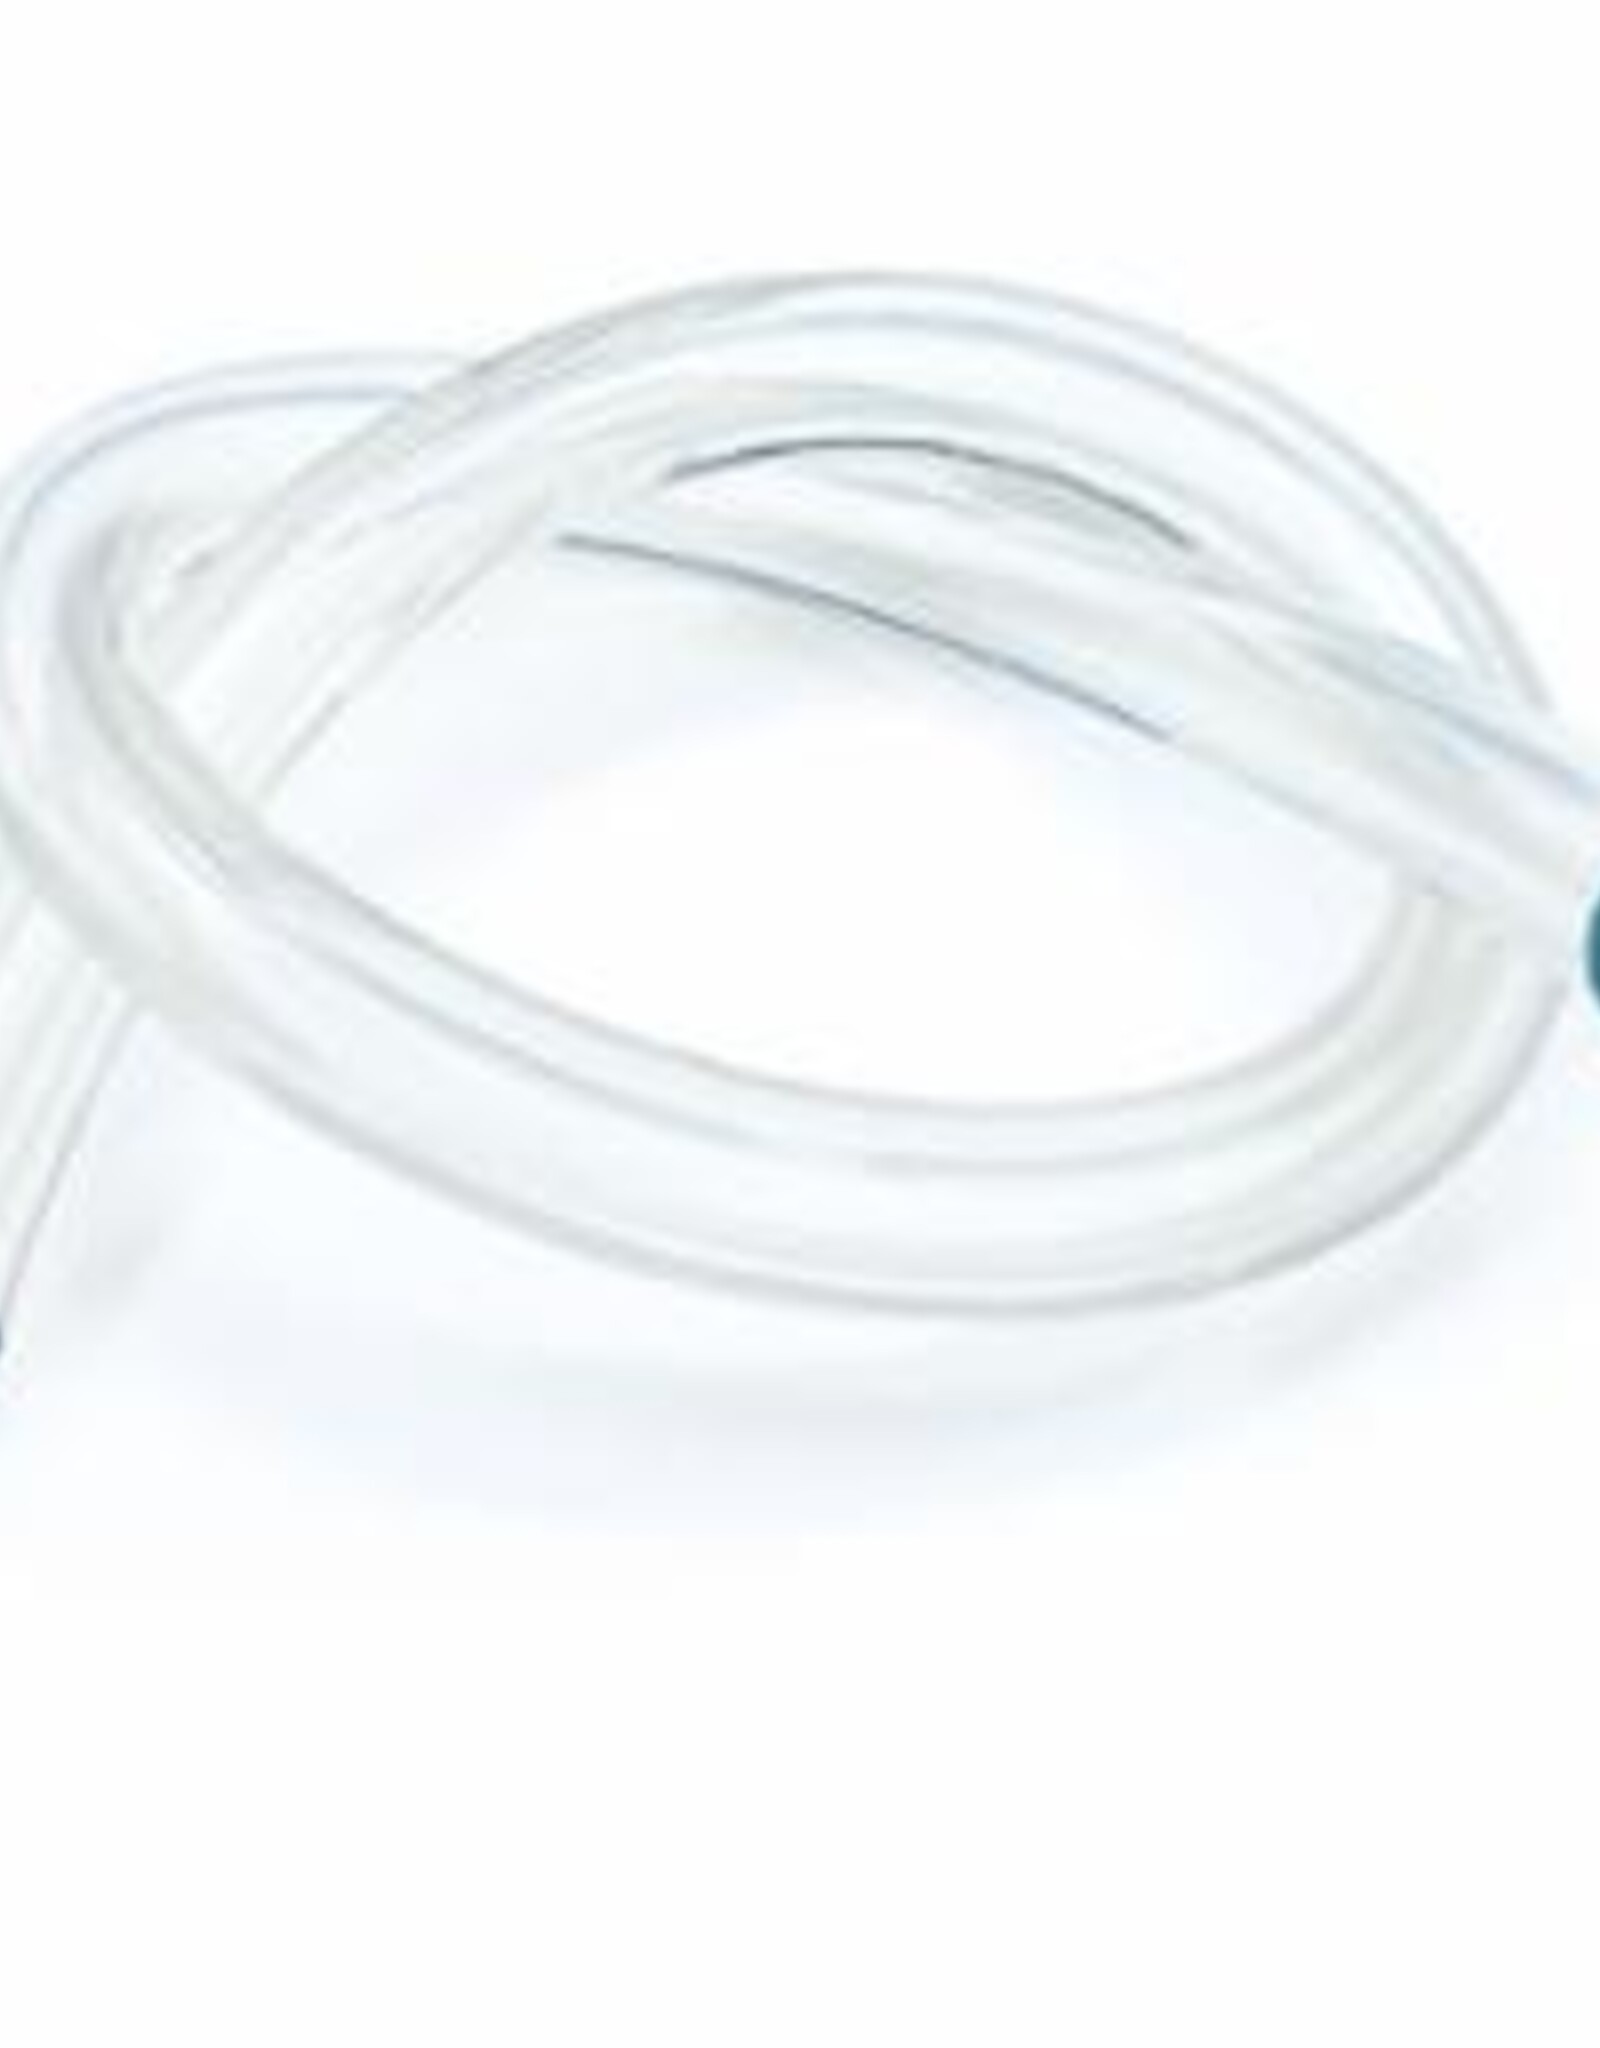 1/2" Clear vinyl Hose/tubing -wide wall- (per ft)